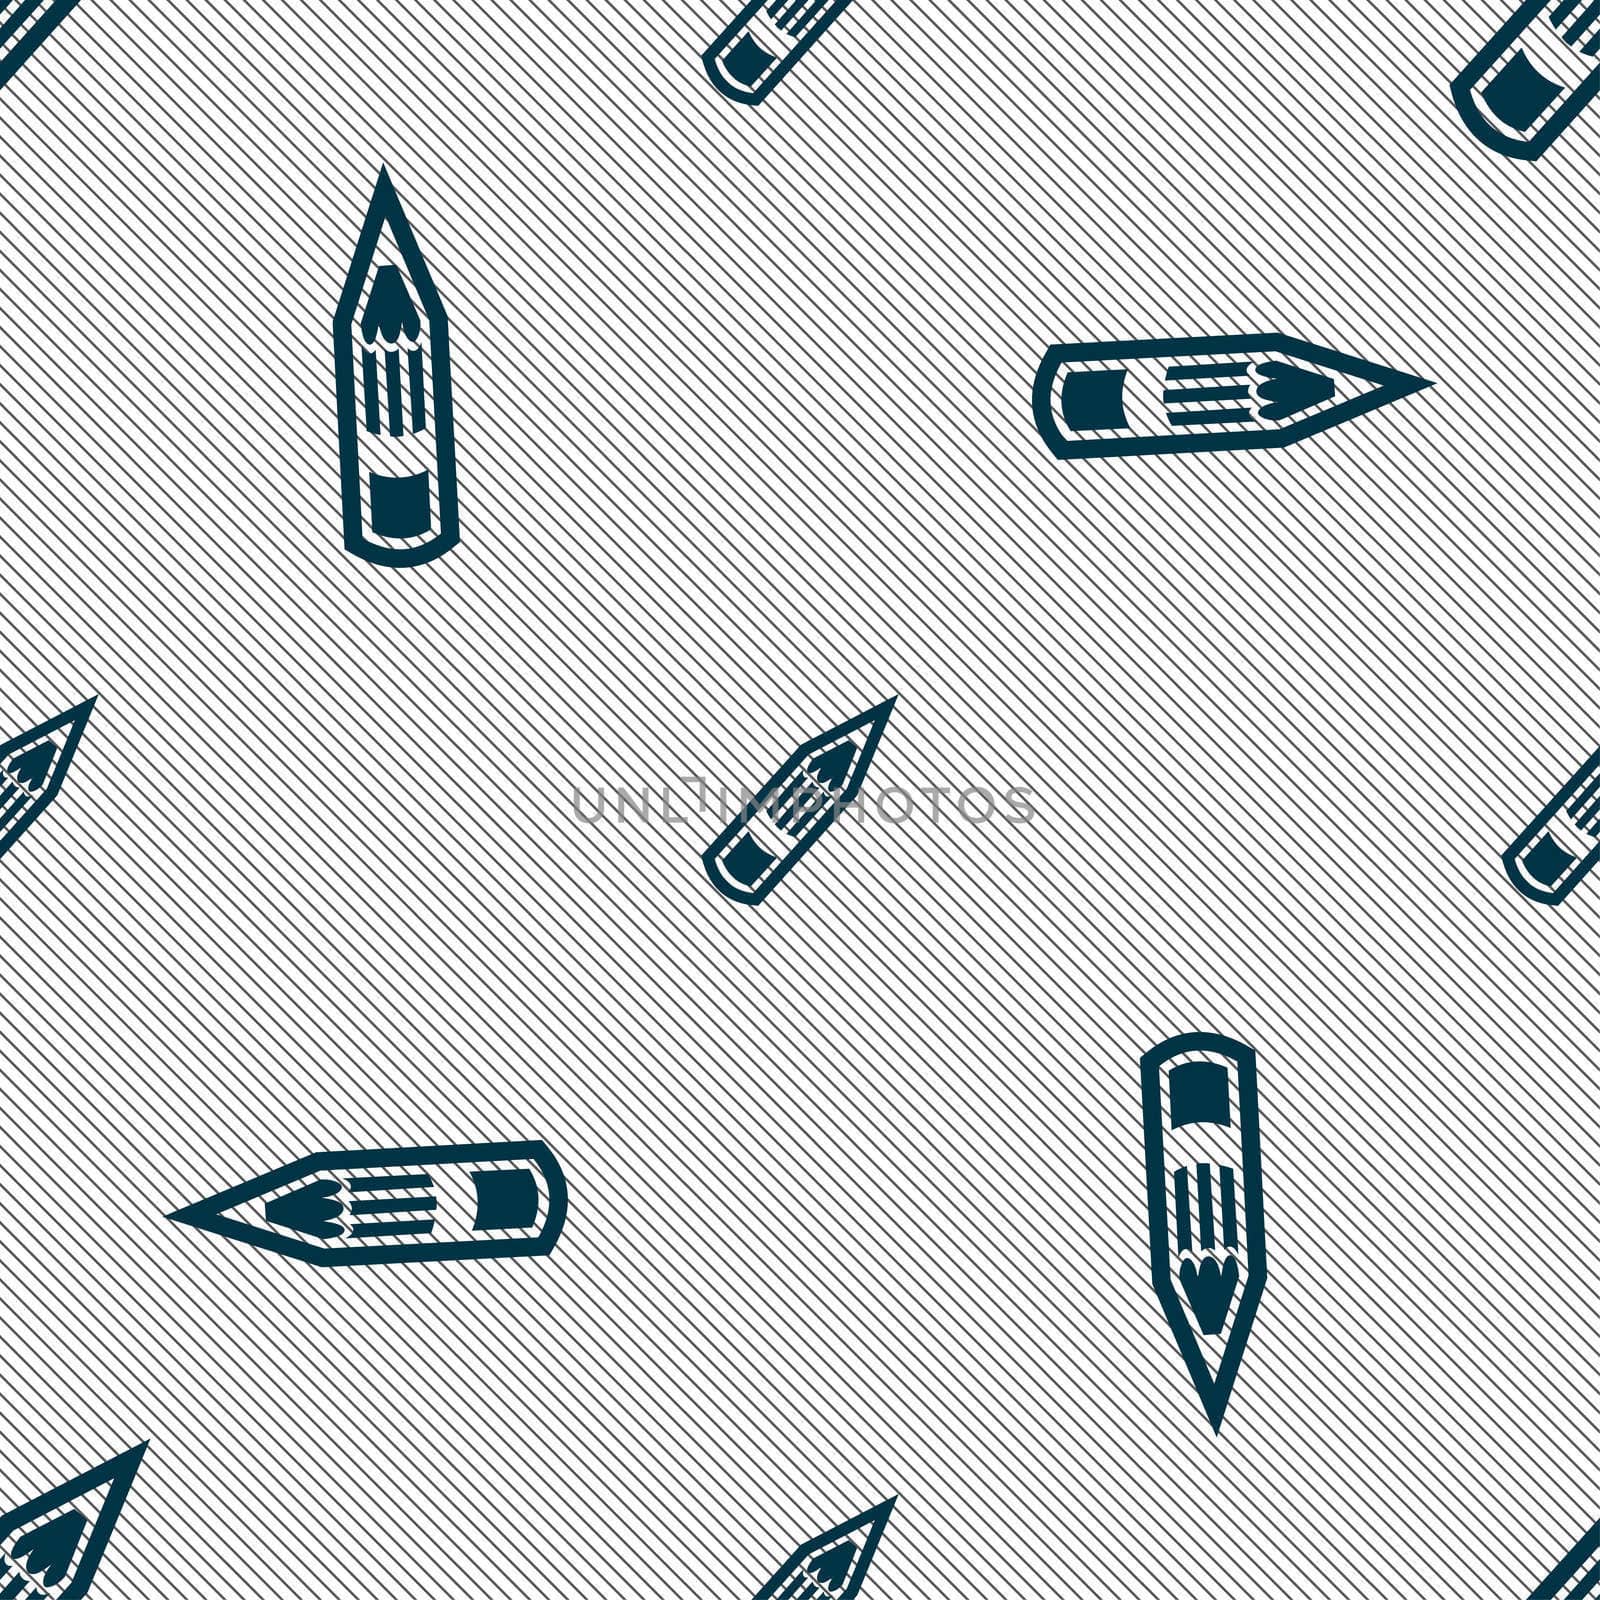 Pencil icon sign. Seamless pattern with geometric texture.  by serhii_lohvyniuk